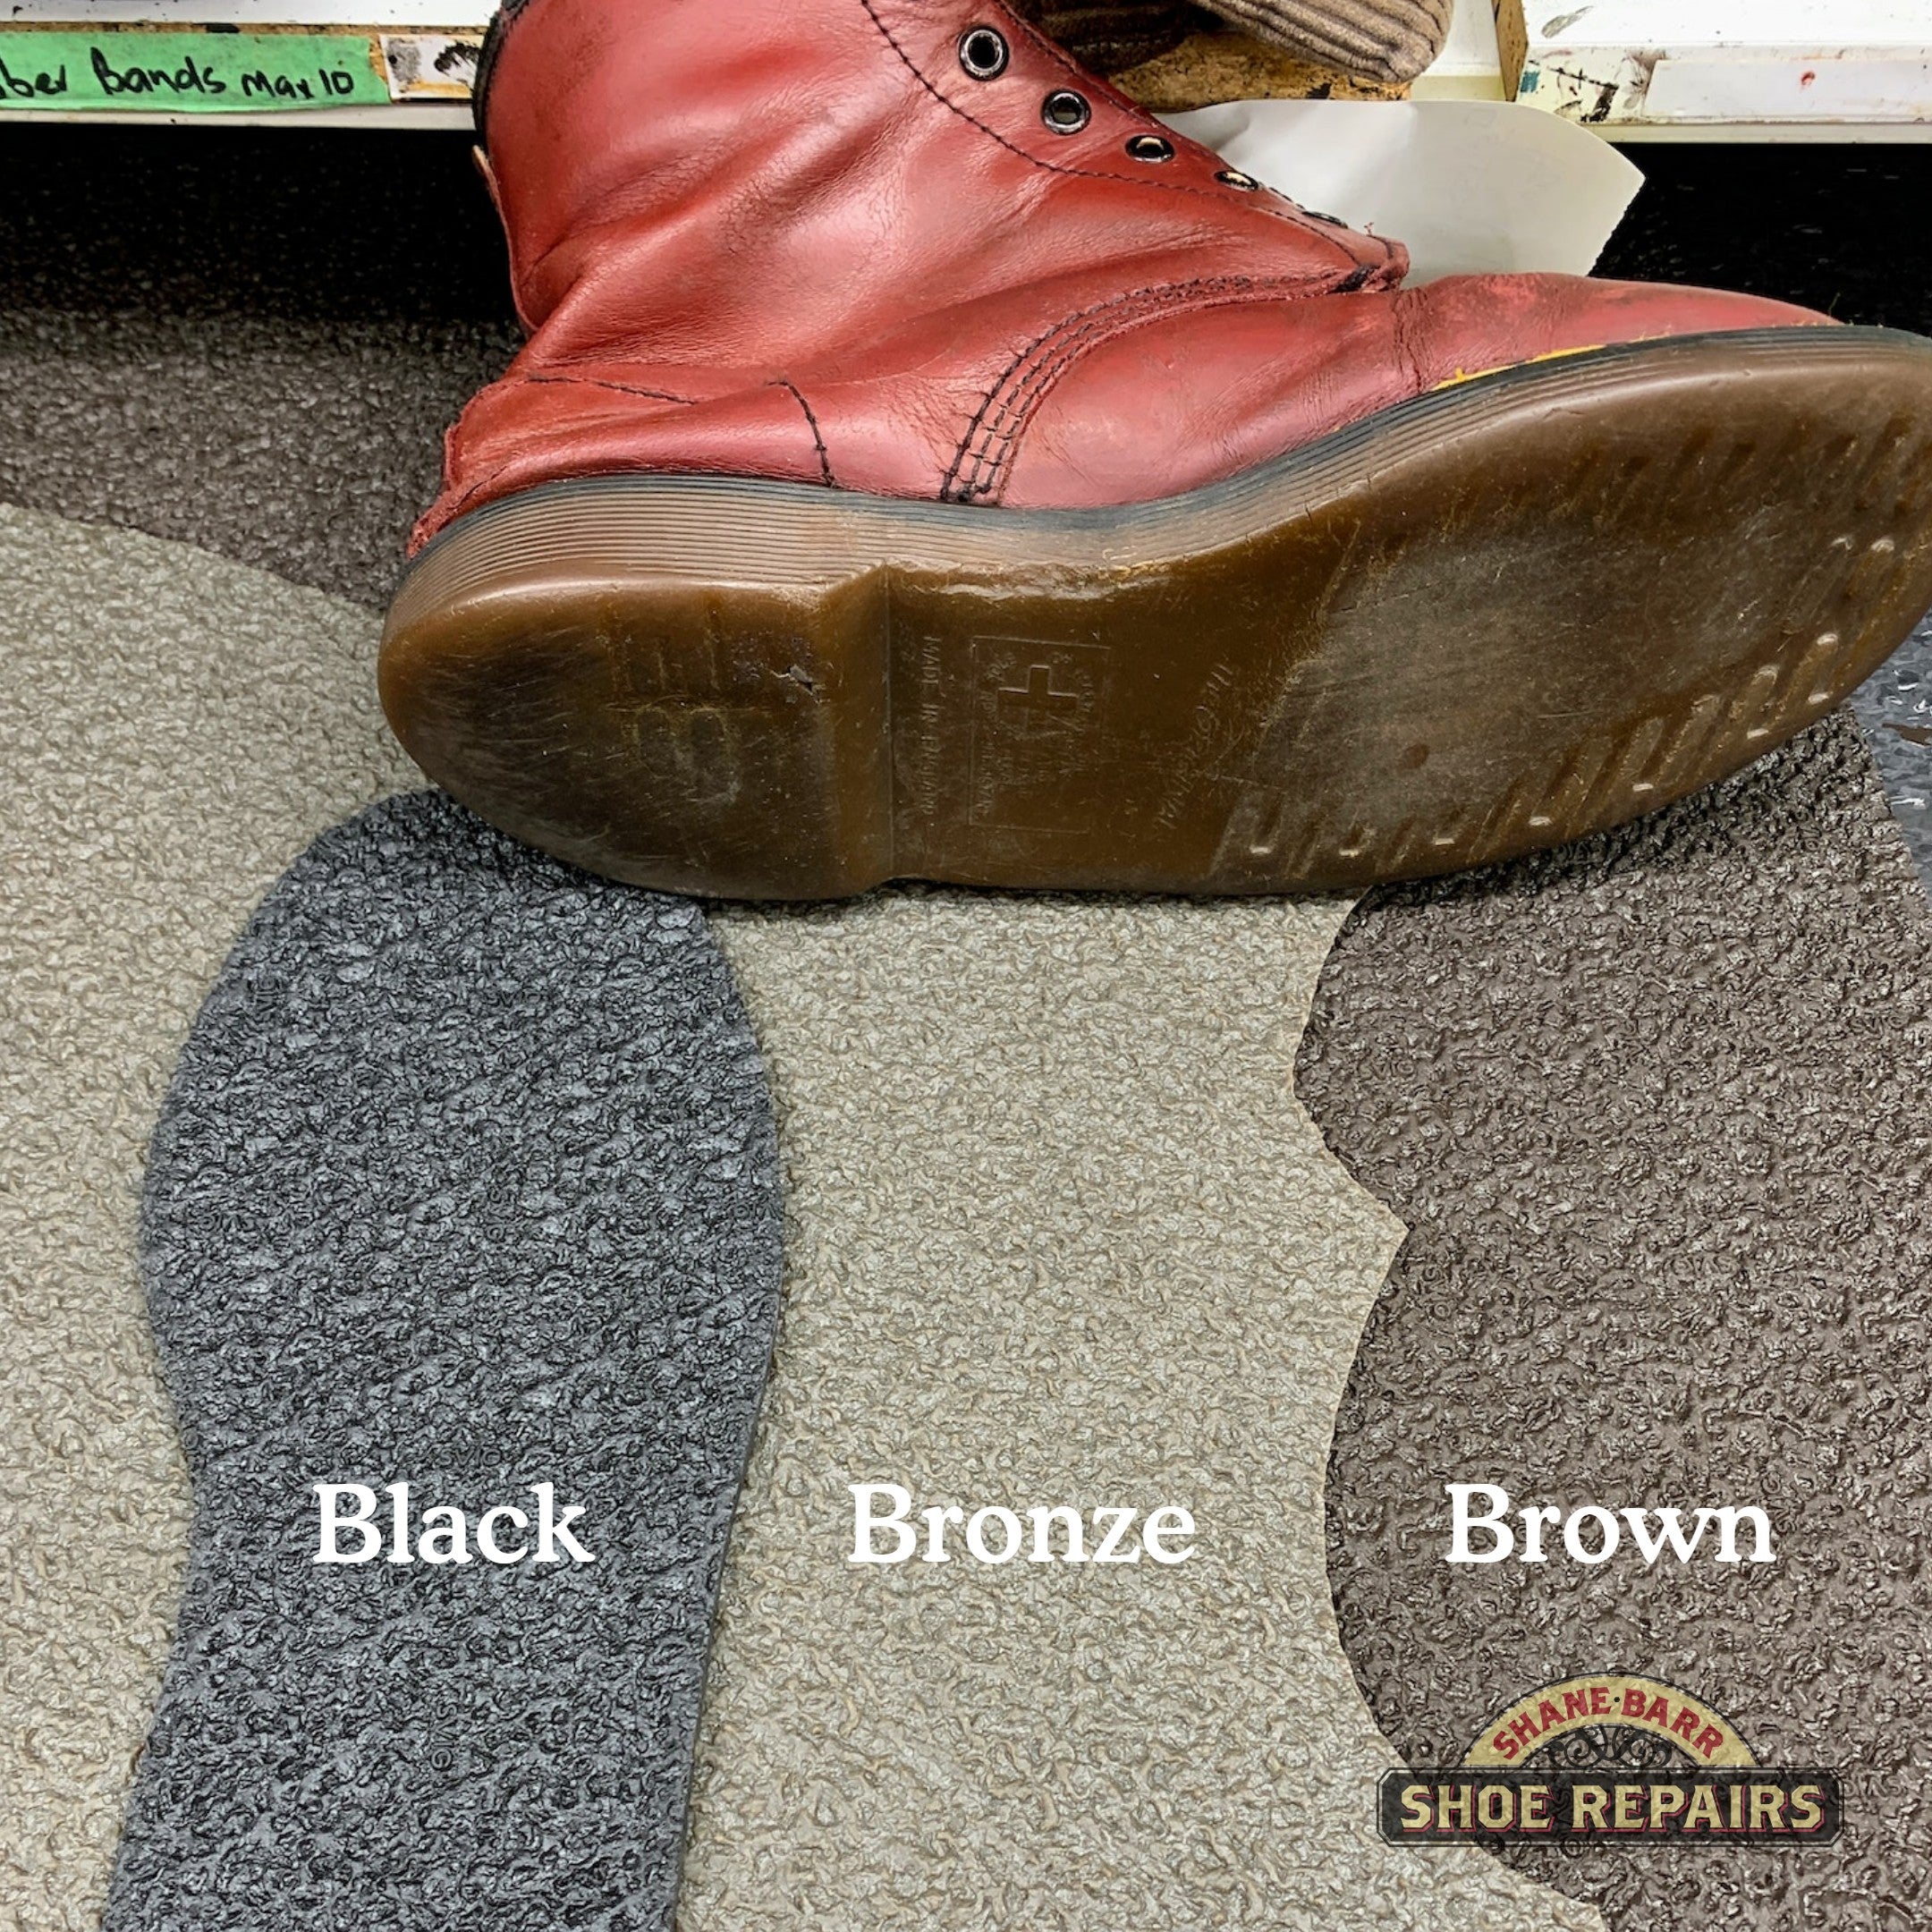 Cherry-Dr-Martens-Darkish-soles-Black-Bronze-and-Brown-soling-sample-at-Shane-Barr-Shoe-Repairs